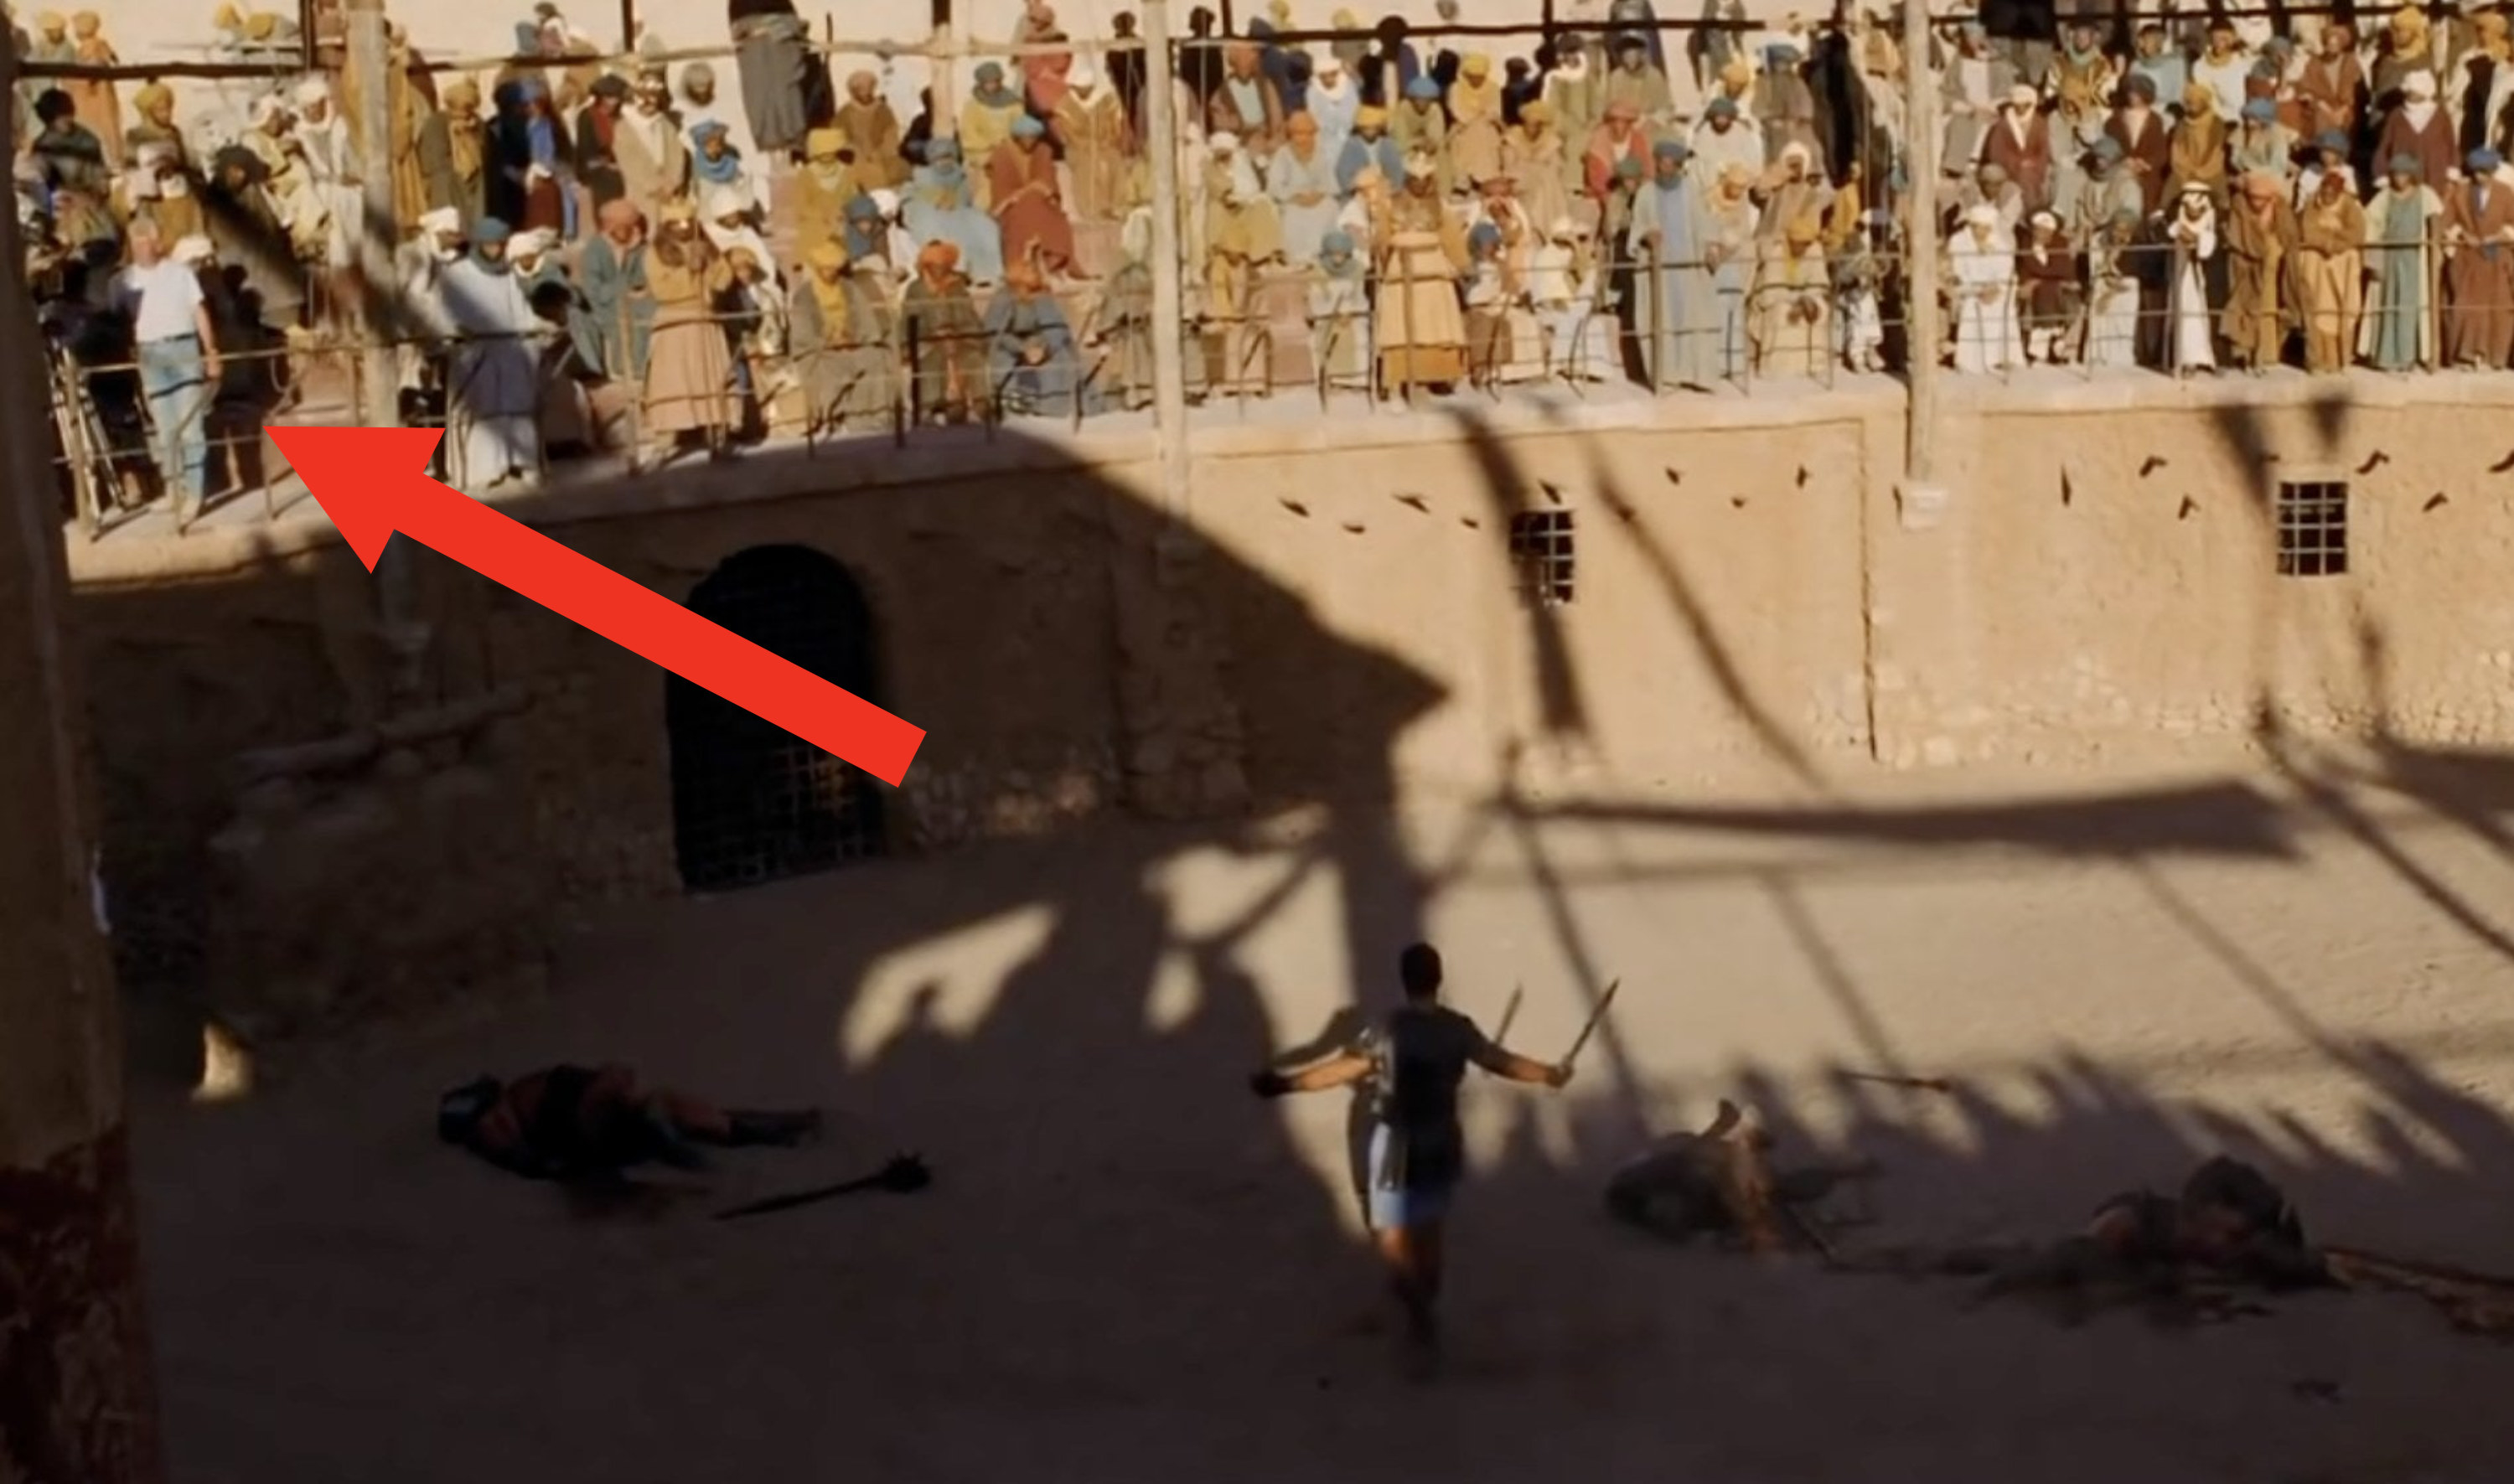 A scene from Gladiator with a crew member in modern-day clothes in the shot